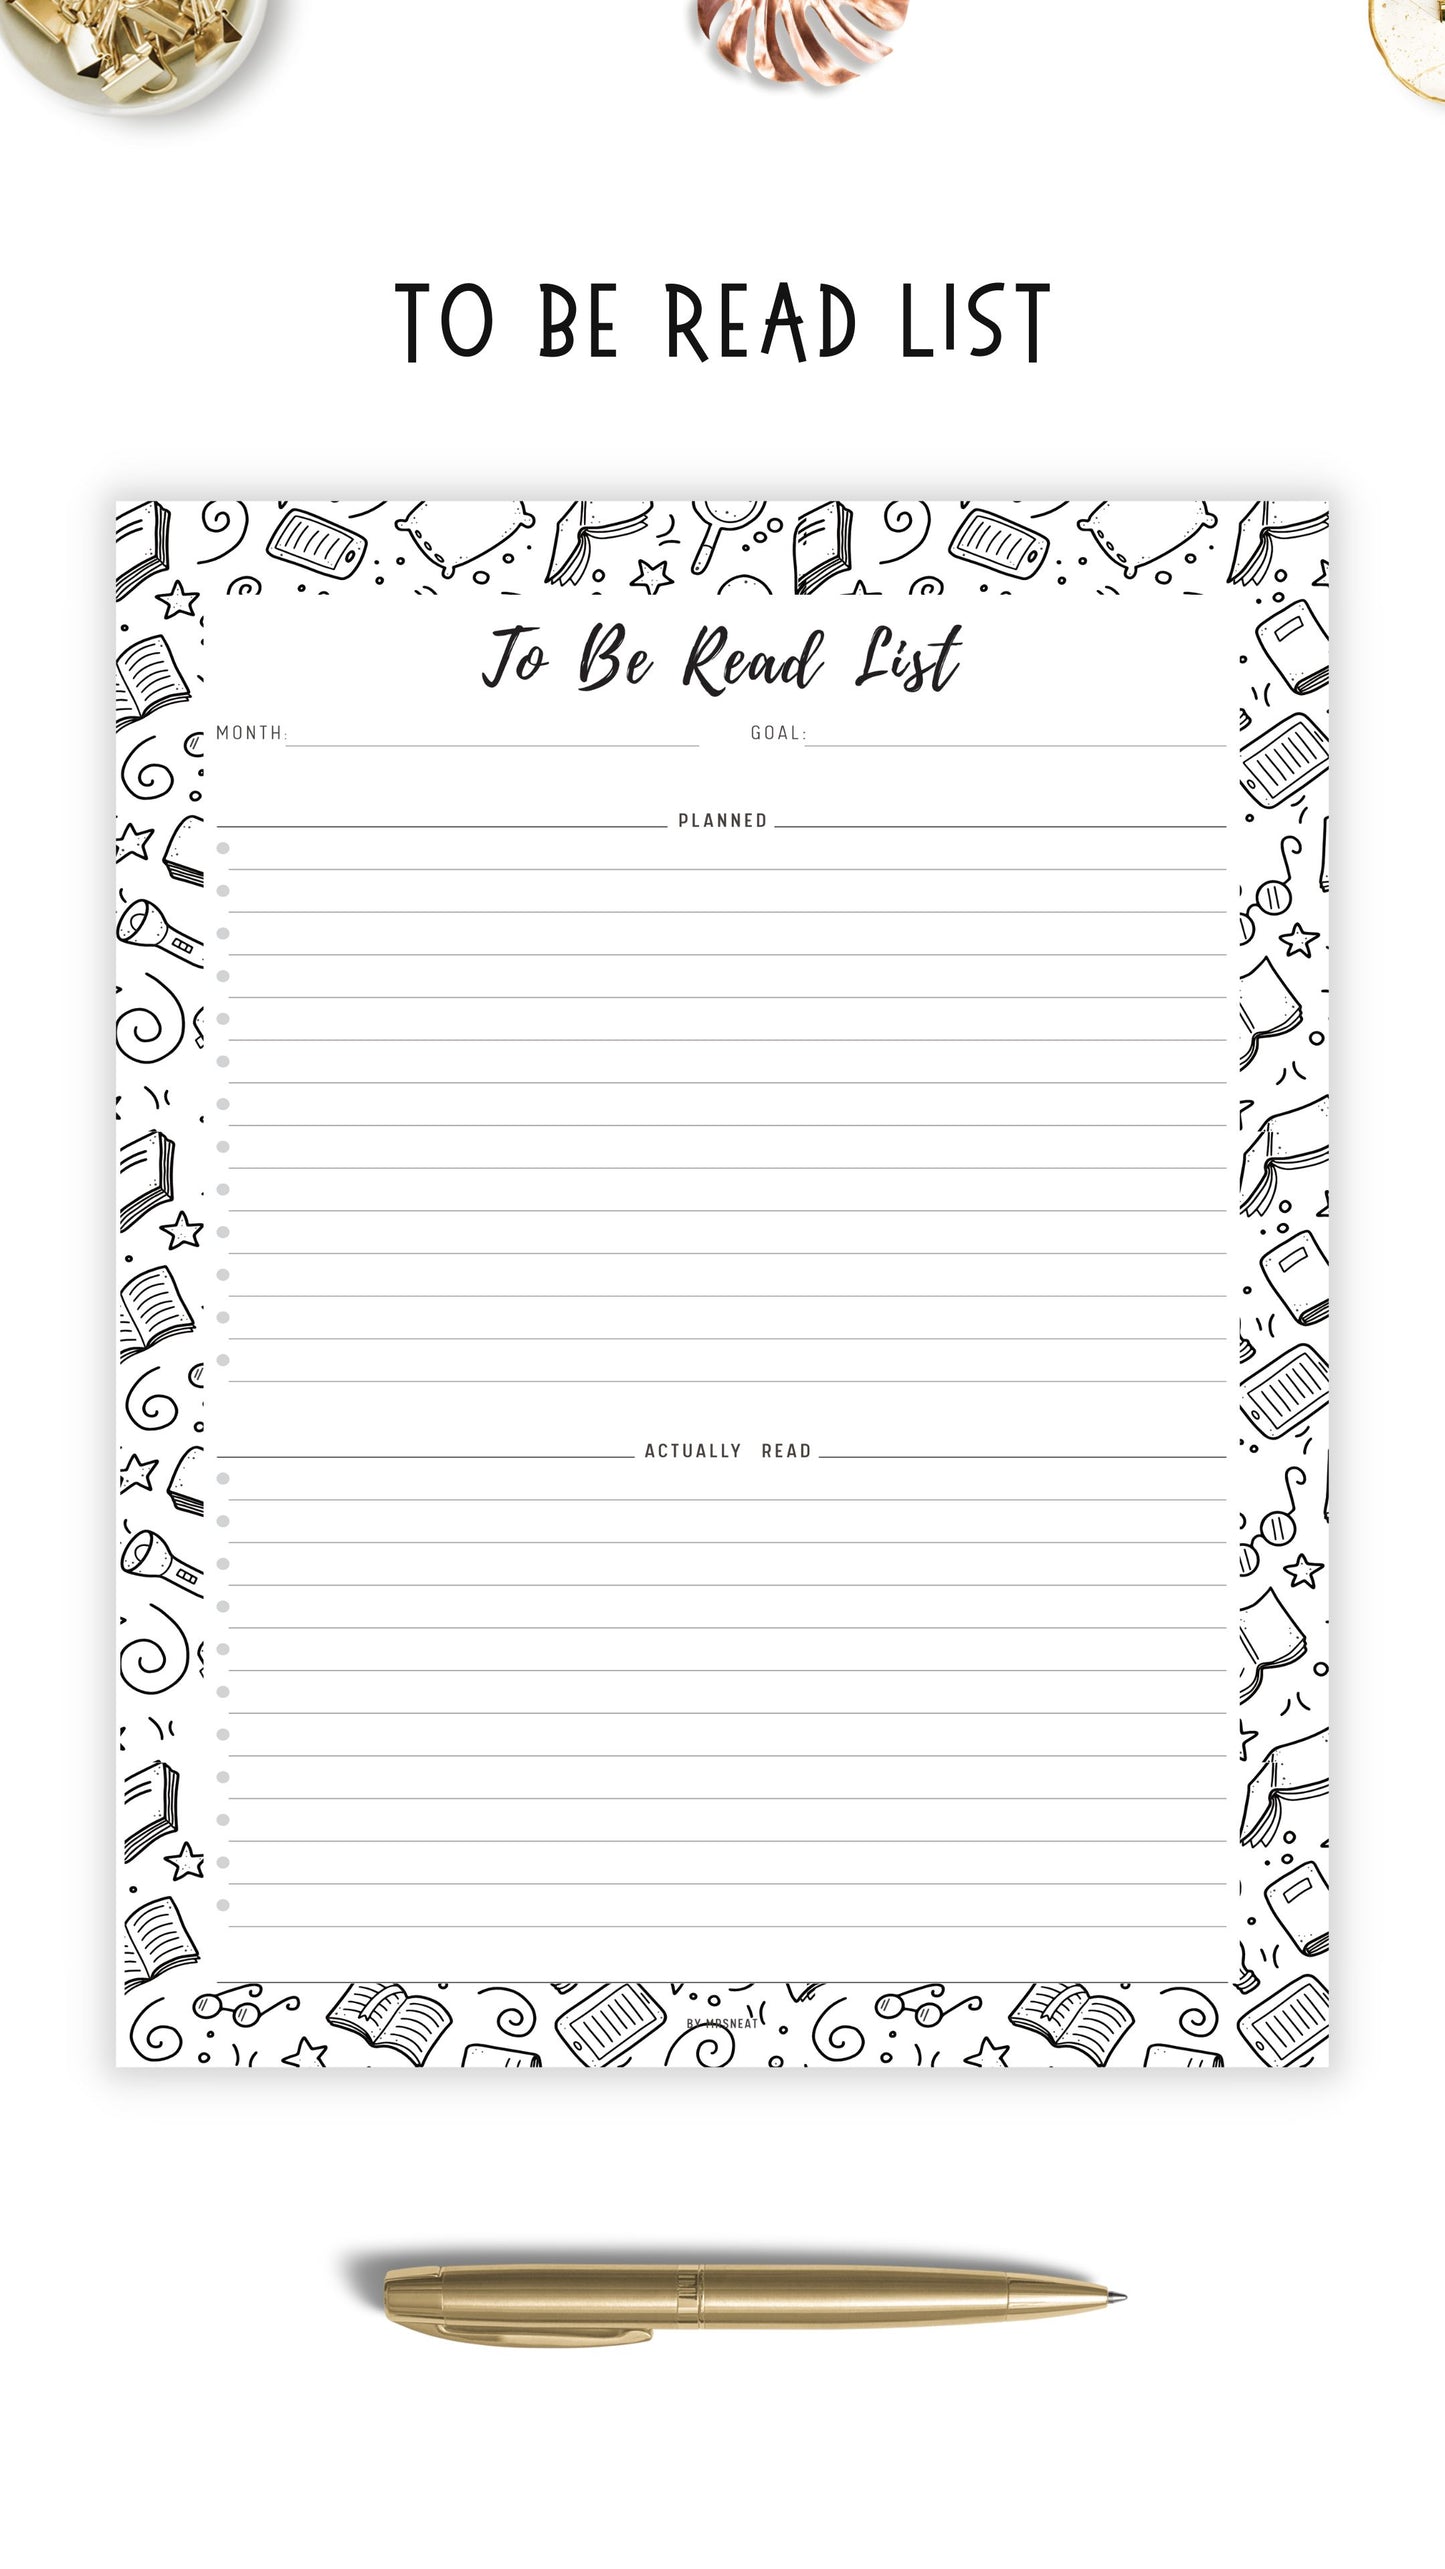 To Be Read List Template Printable, 5 colors ; Peach, Pink, Blue, Green, Neutral, 4 sizes ; A4, A5, Letter, Half Letter, Digital Planner